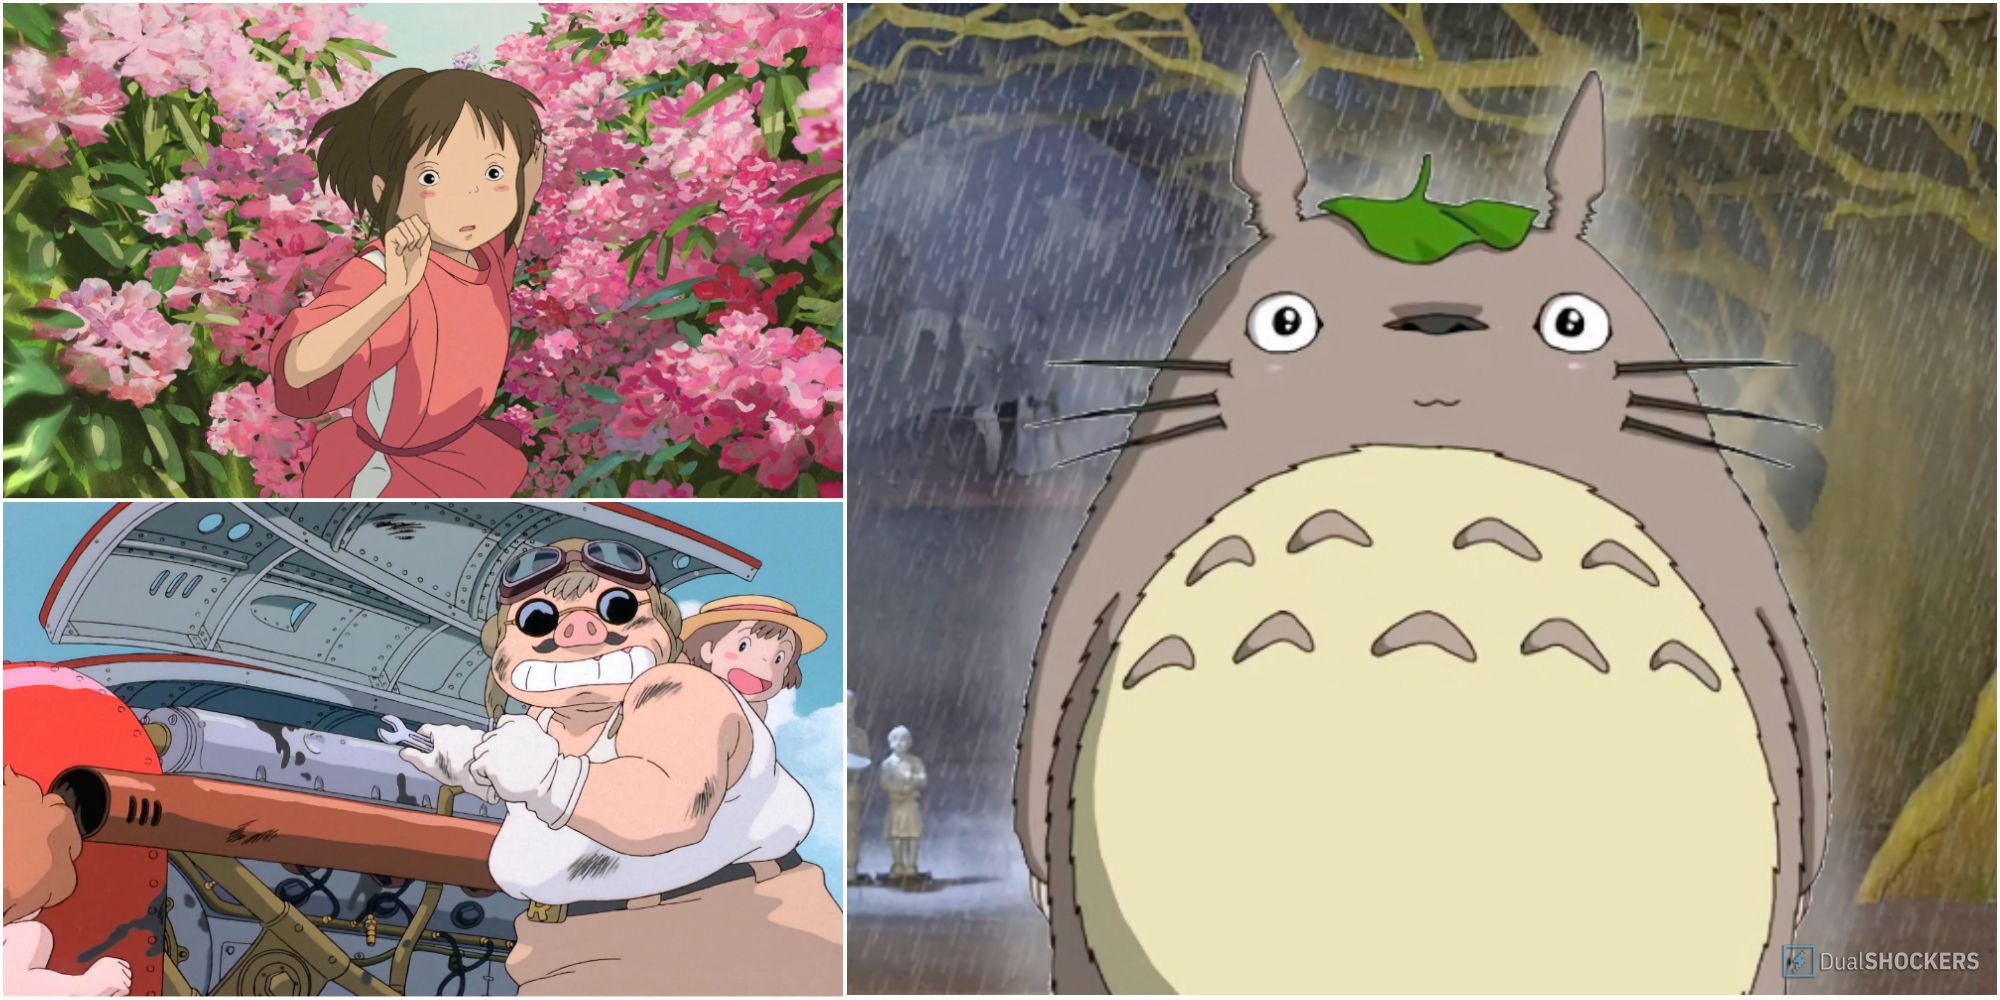 Chihiro Porco and Totoro Feature